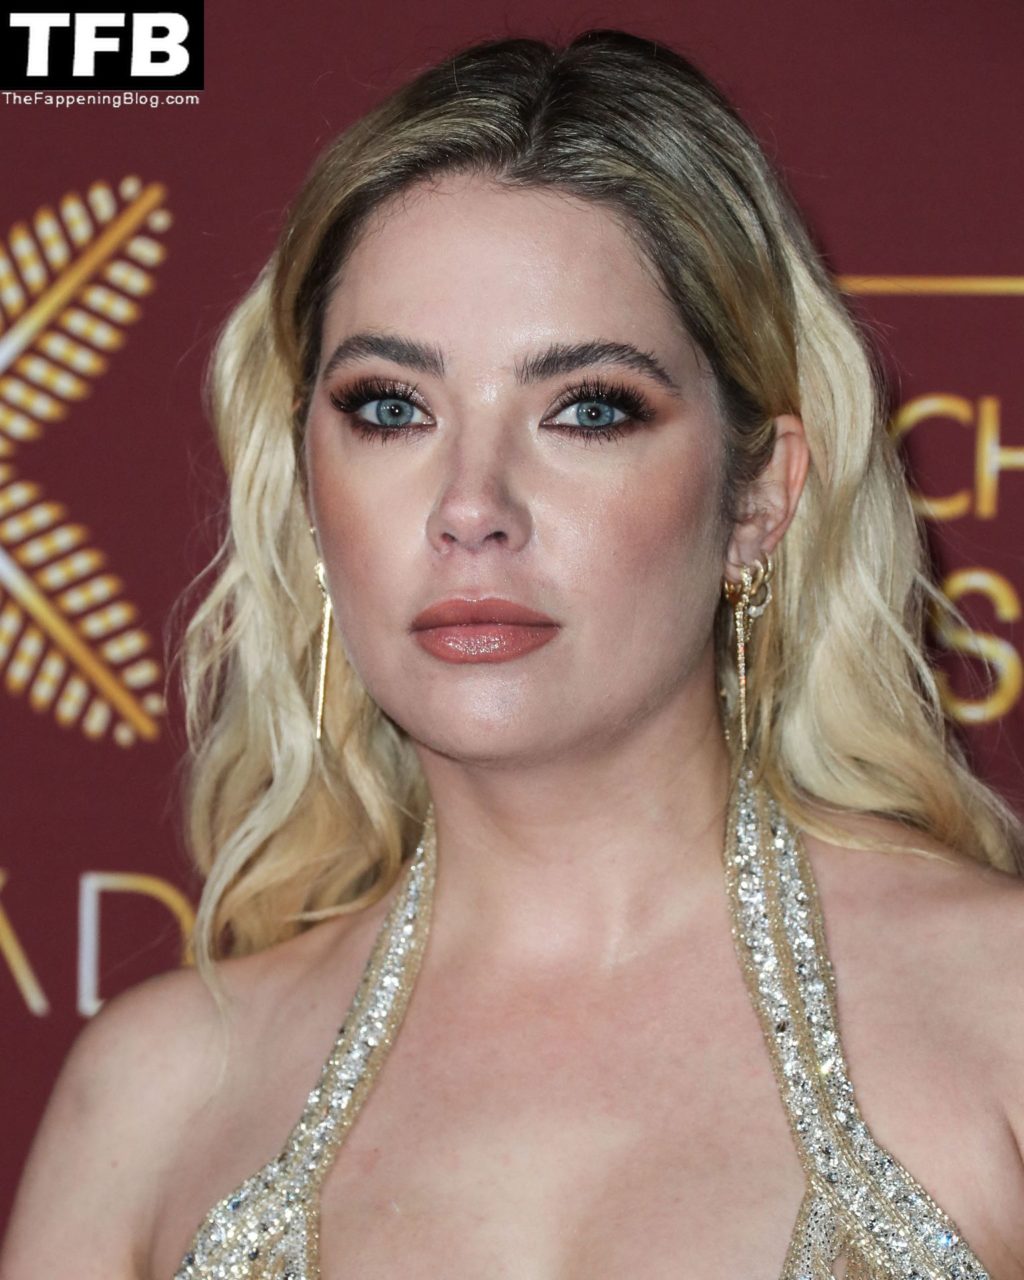 Ashley Benson Displays Nice Cleavage at the Darren Dzienciol and Richie Akiva Oscar Party (22 Photos)